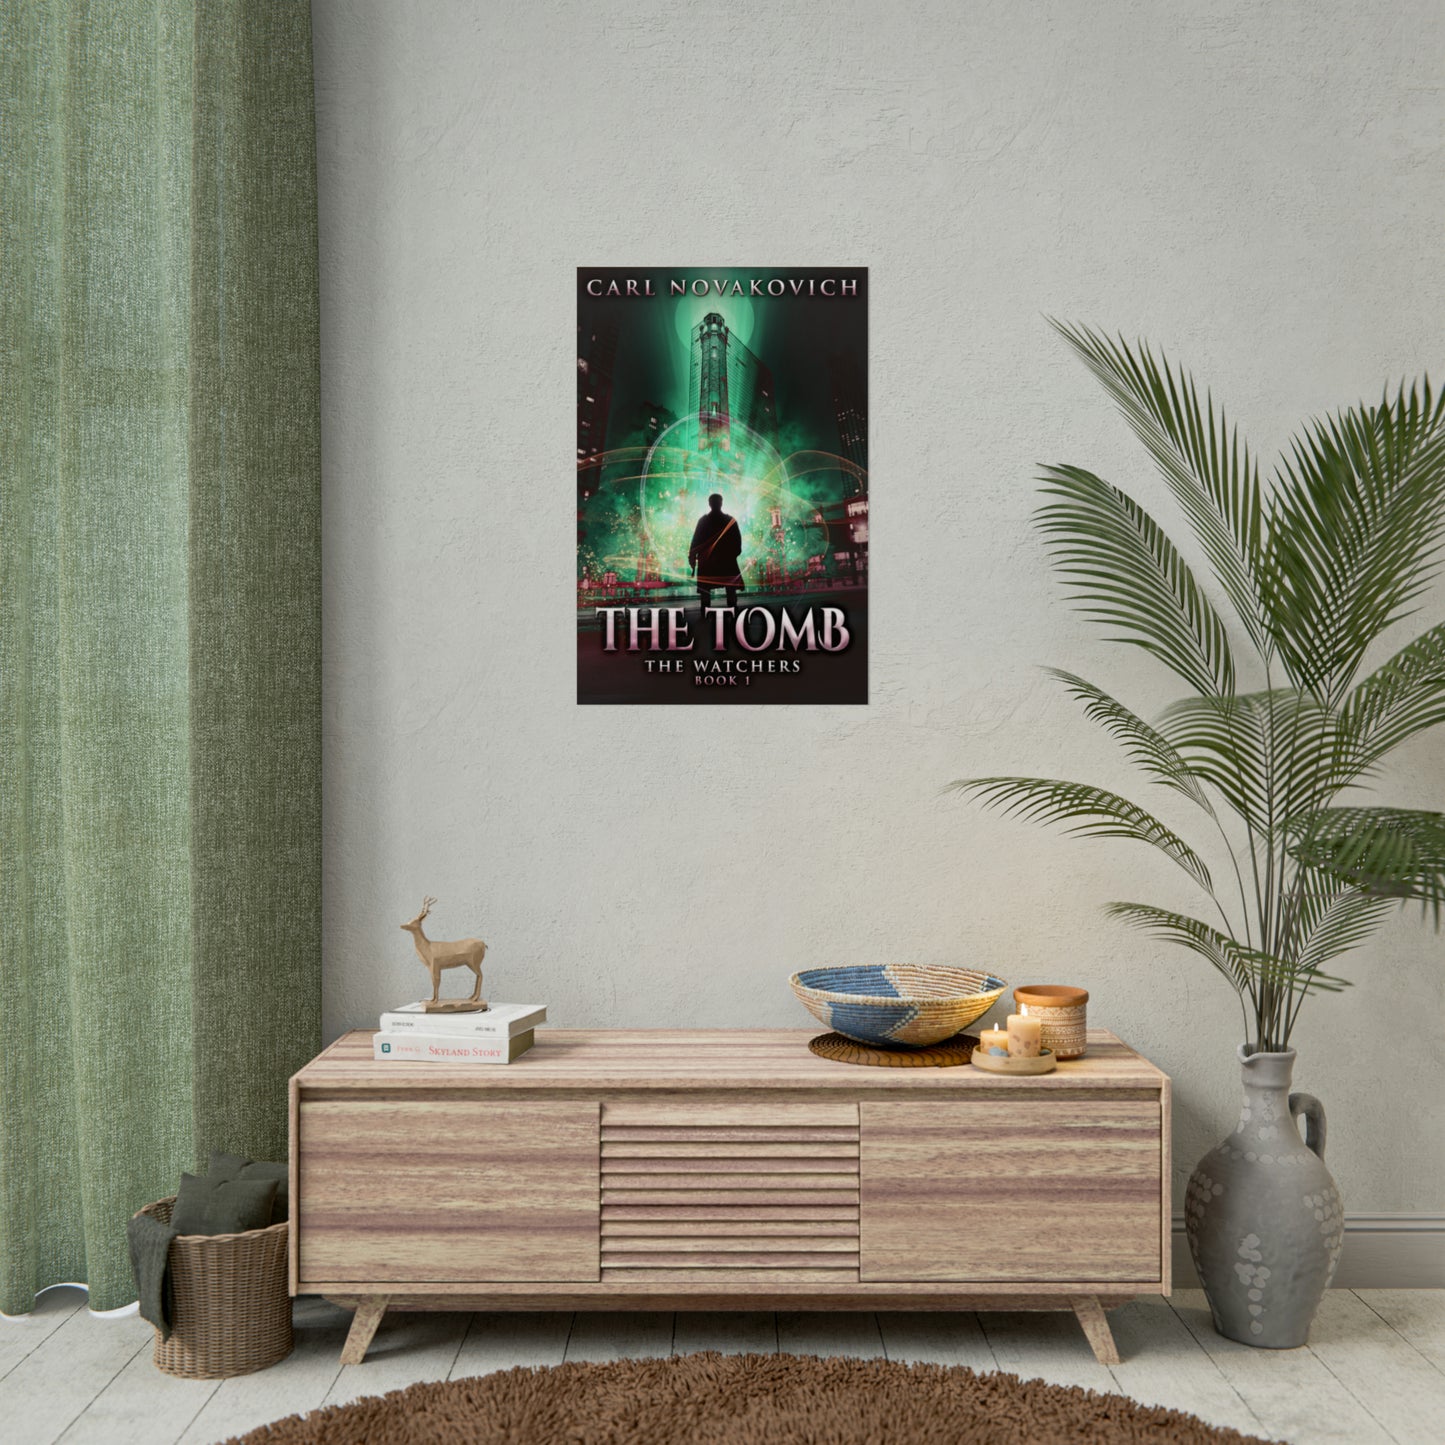 The Tomb - Rolled Poster